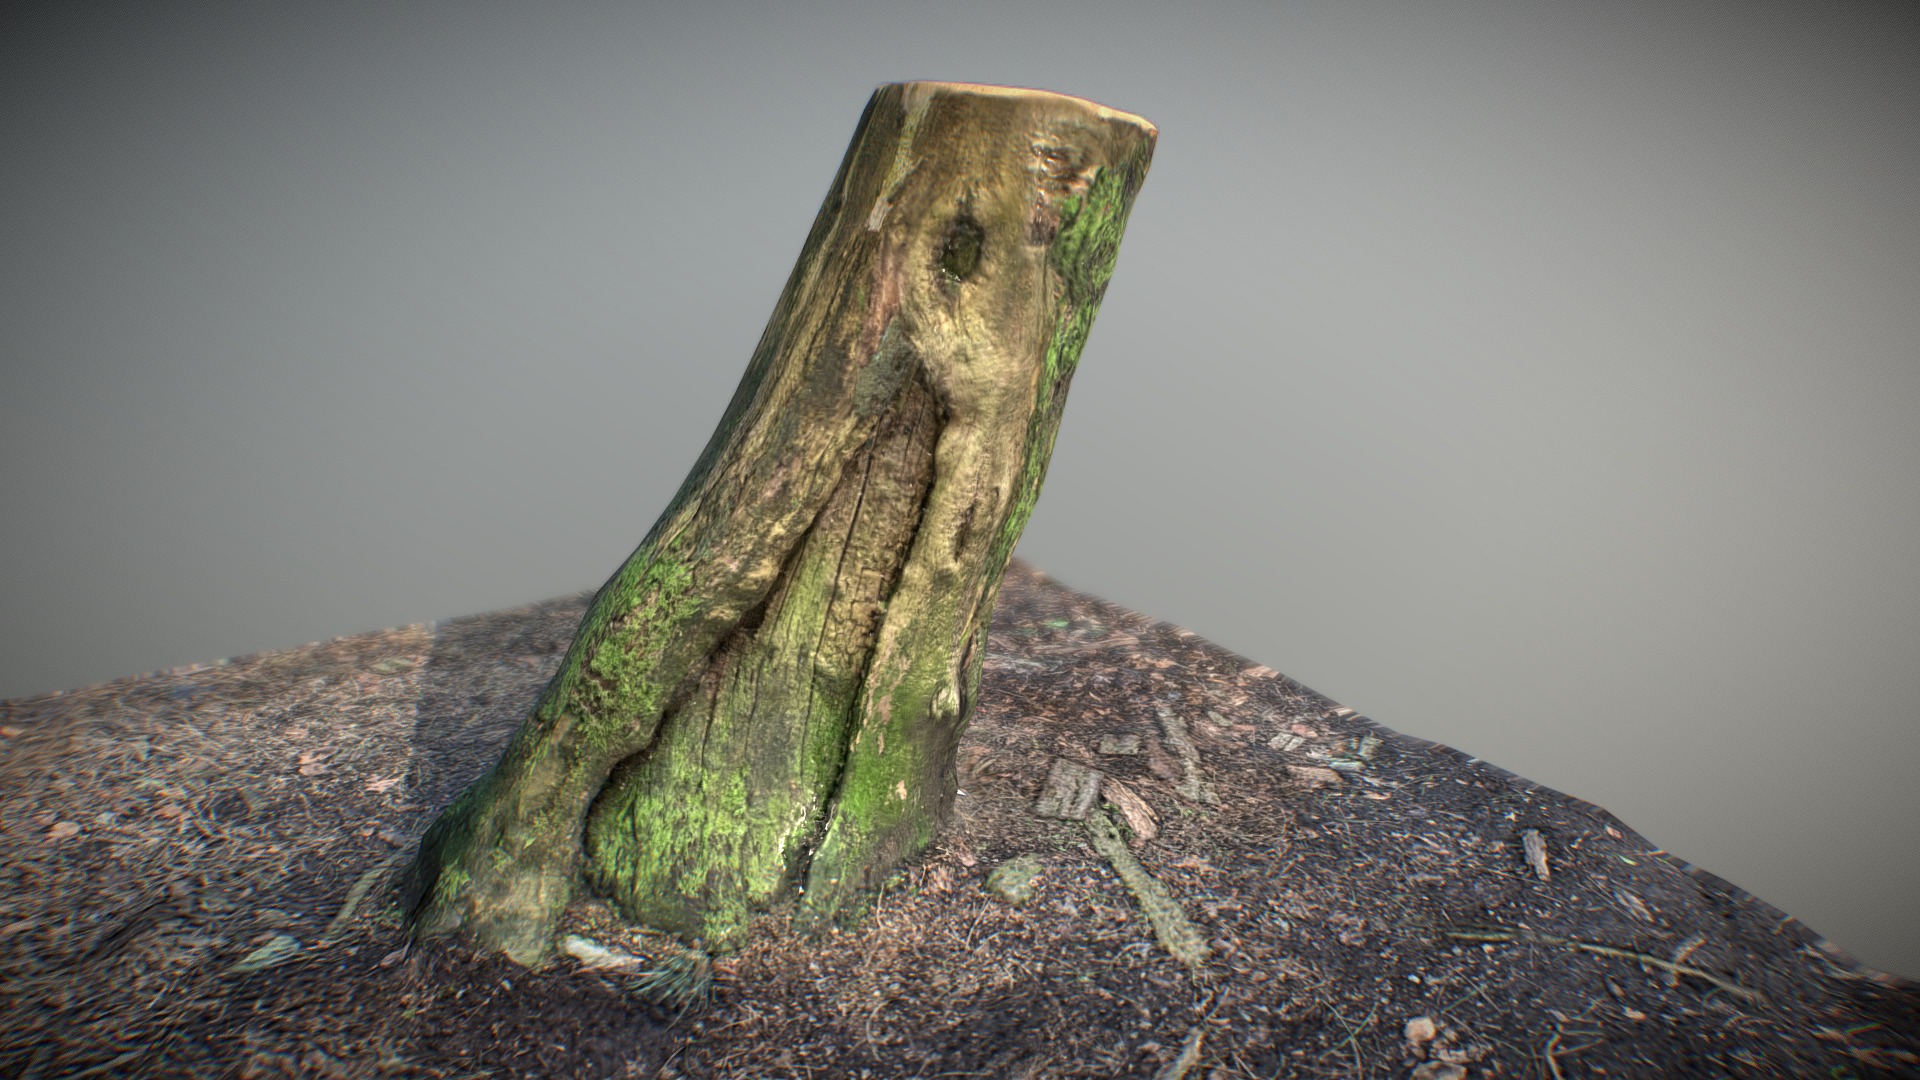 3D model Tree Trunk – 001 – Low Poly – Maps 2048 by 2048 - This is a 3D model of the Tree Trunk - 001 - Low Poly - Maps 2048 by 2048. The 3D model is about a tree stump on a rock.